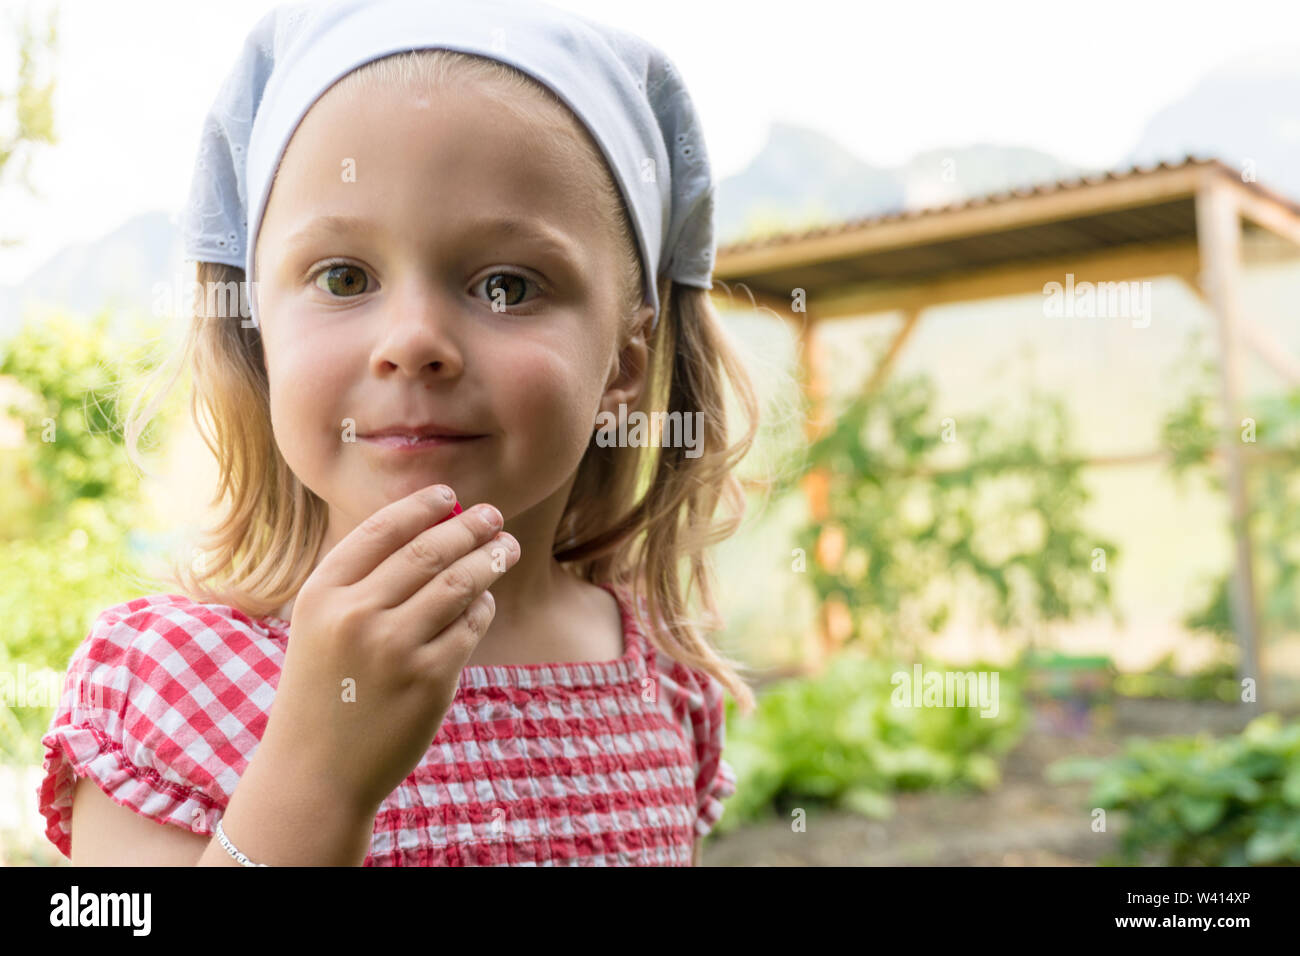 young pre-schoo girl eats a radish she just harvested in her vegetable patch Stock Photo